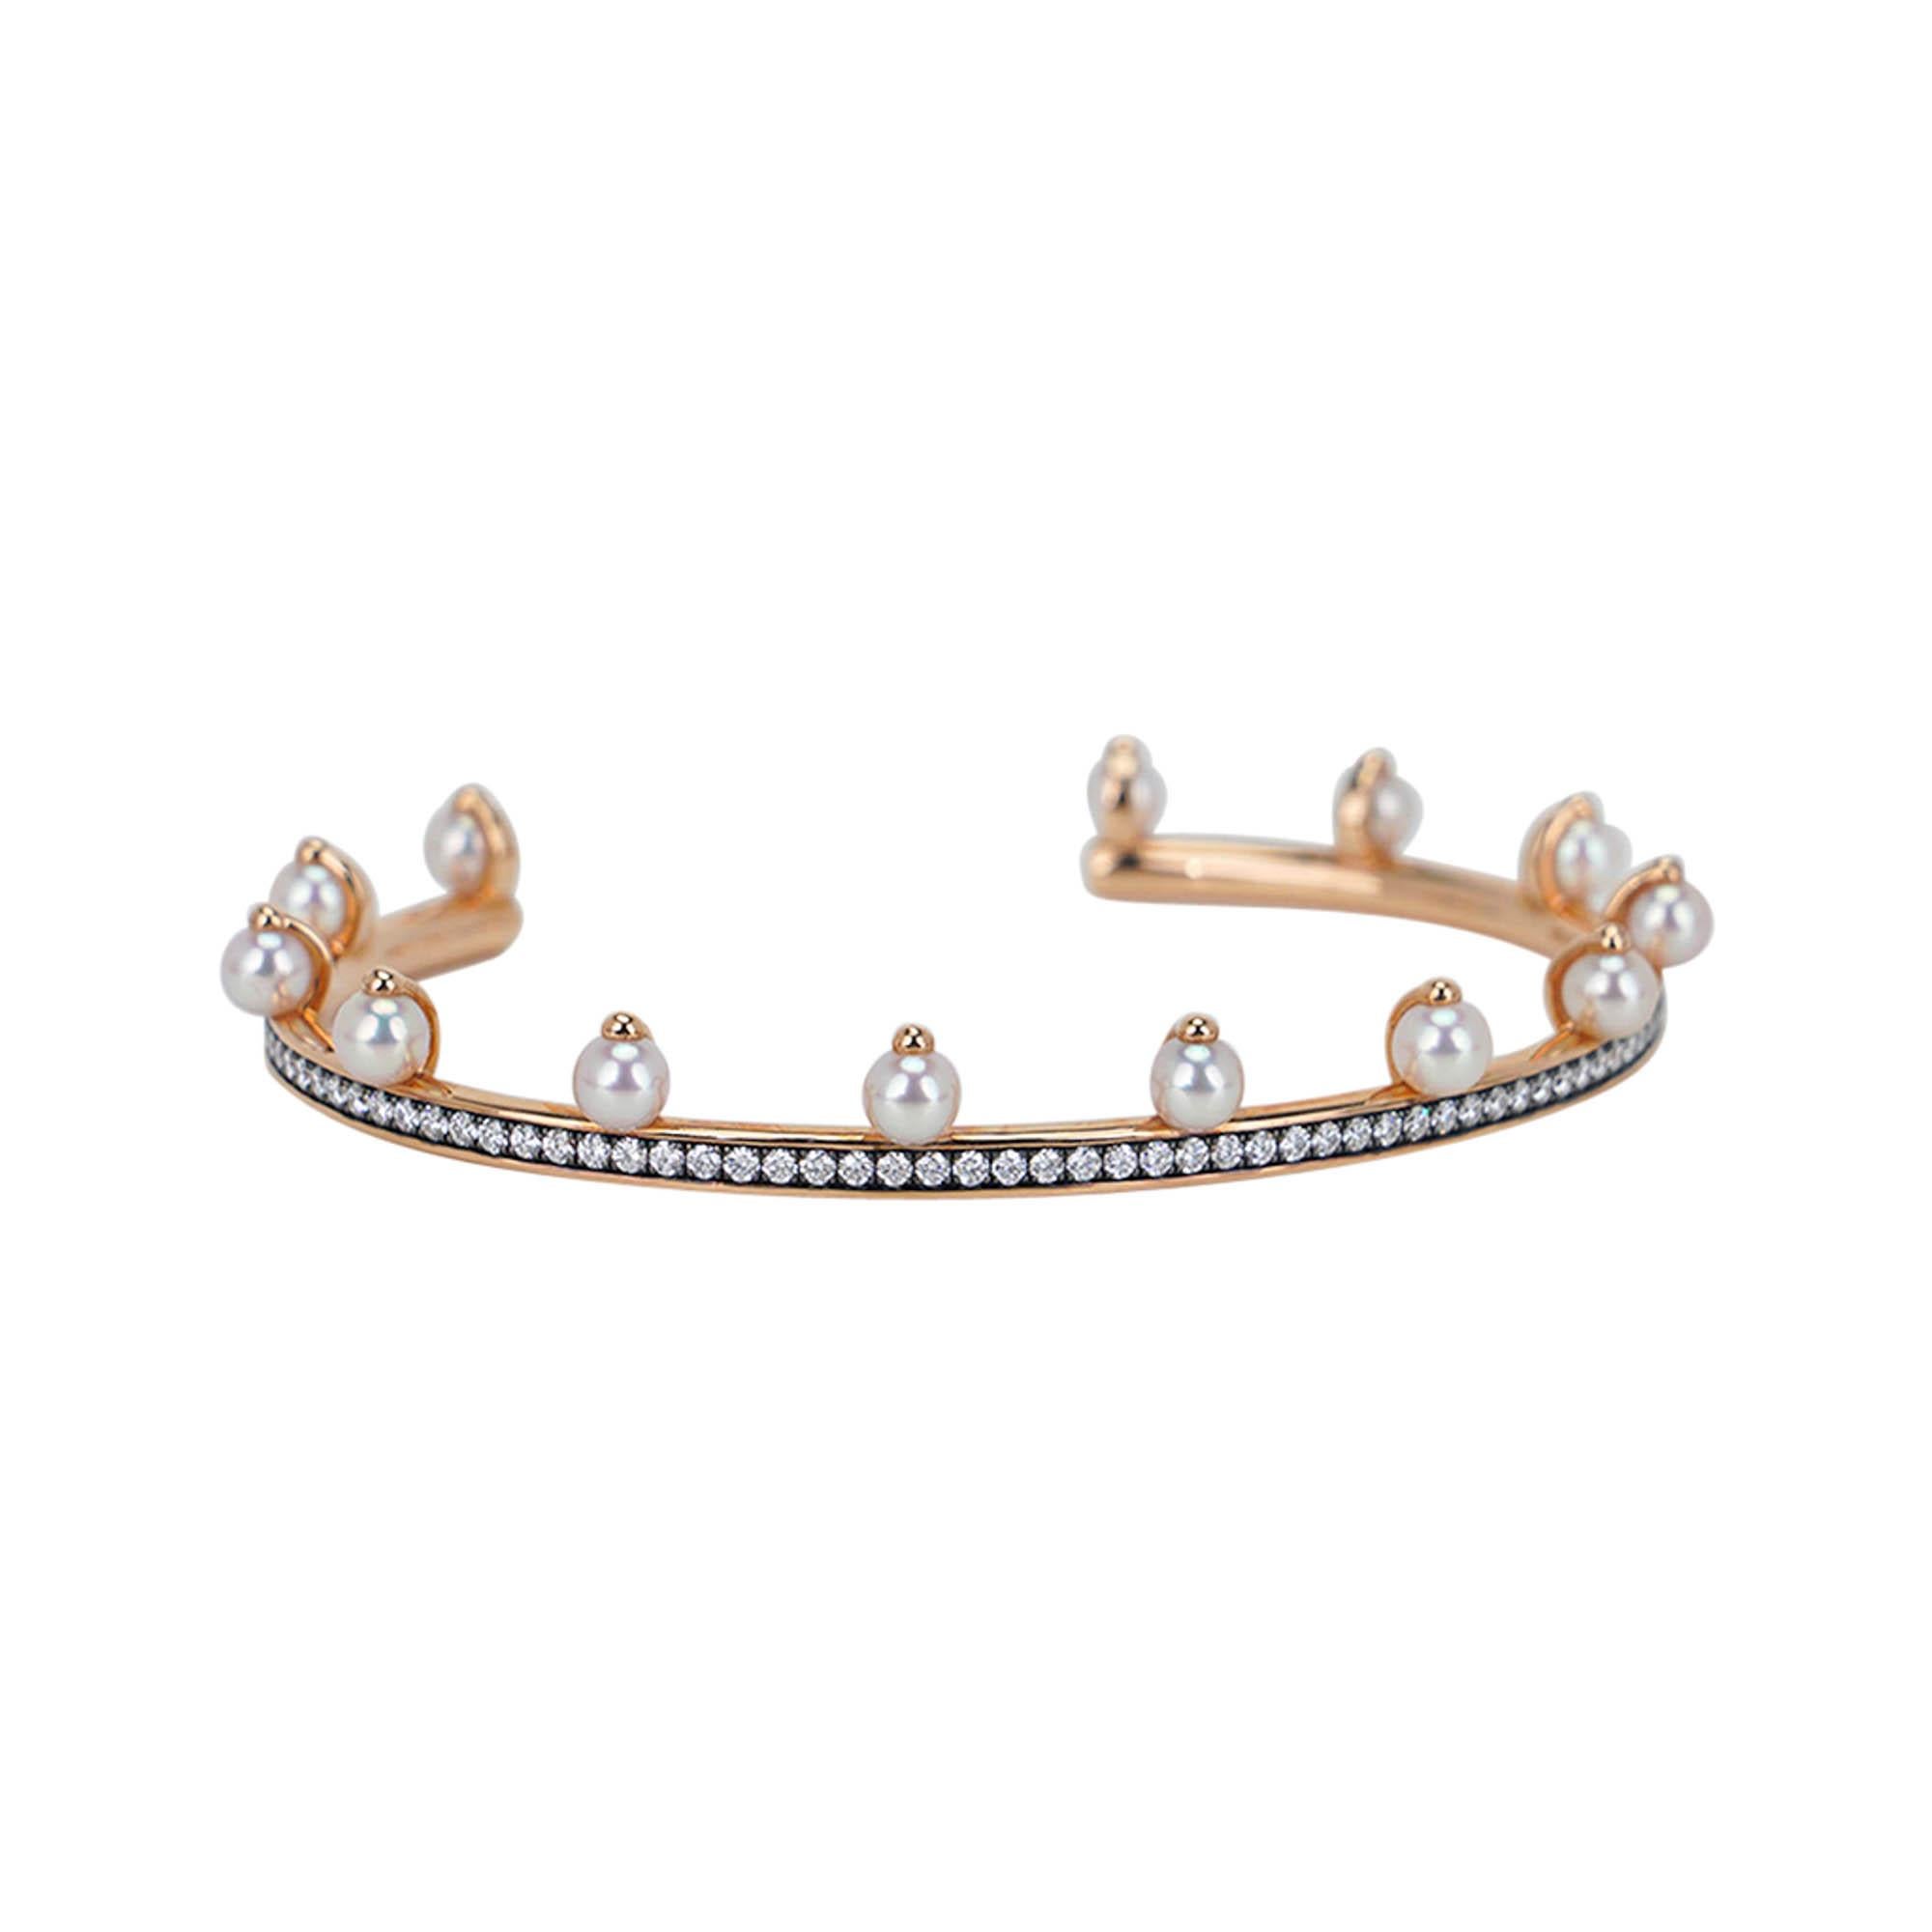 Mightychic offers a limited edition Hermes Chandra Jonc bracelet.
This exquisite bracelet/cuff is featured in 18k rose gold, set with 93 diamonds and 13 pearls.
Total carat weight is 1.05.
Comes with Hermes pillow and Signature box.
NEW or NEVER